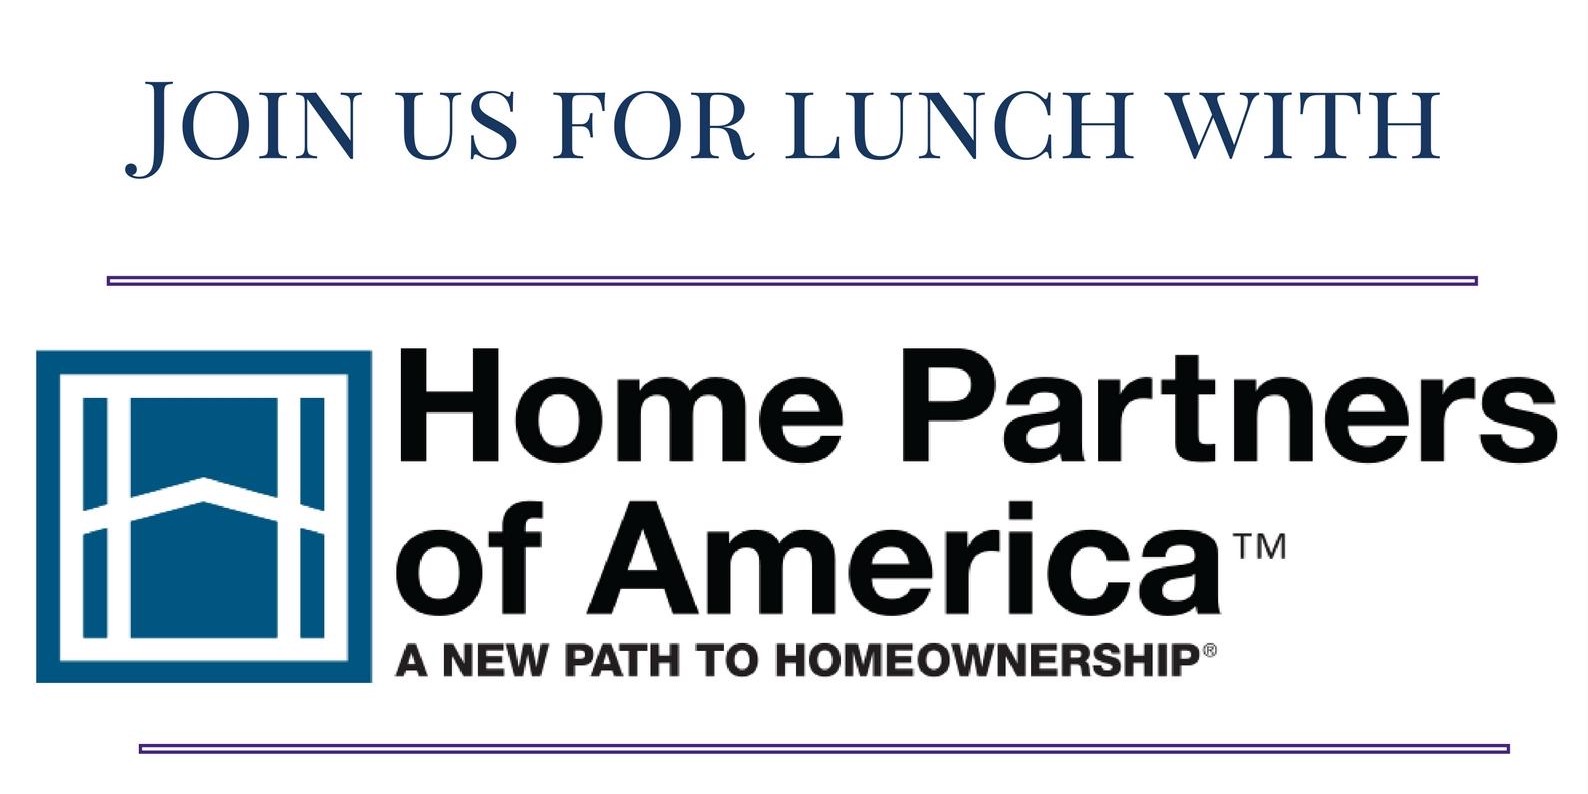 Home Partners of America Lunch with Showcase Realty